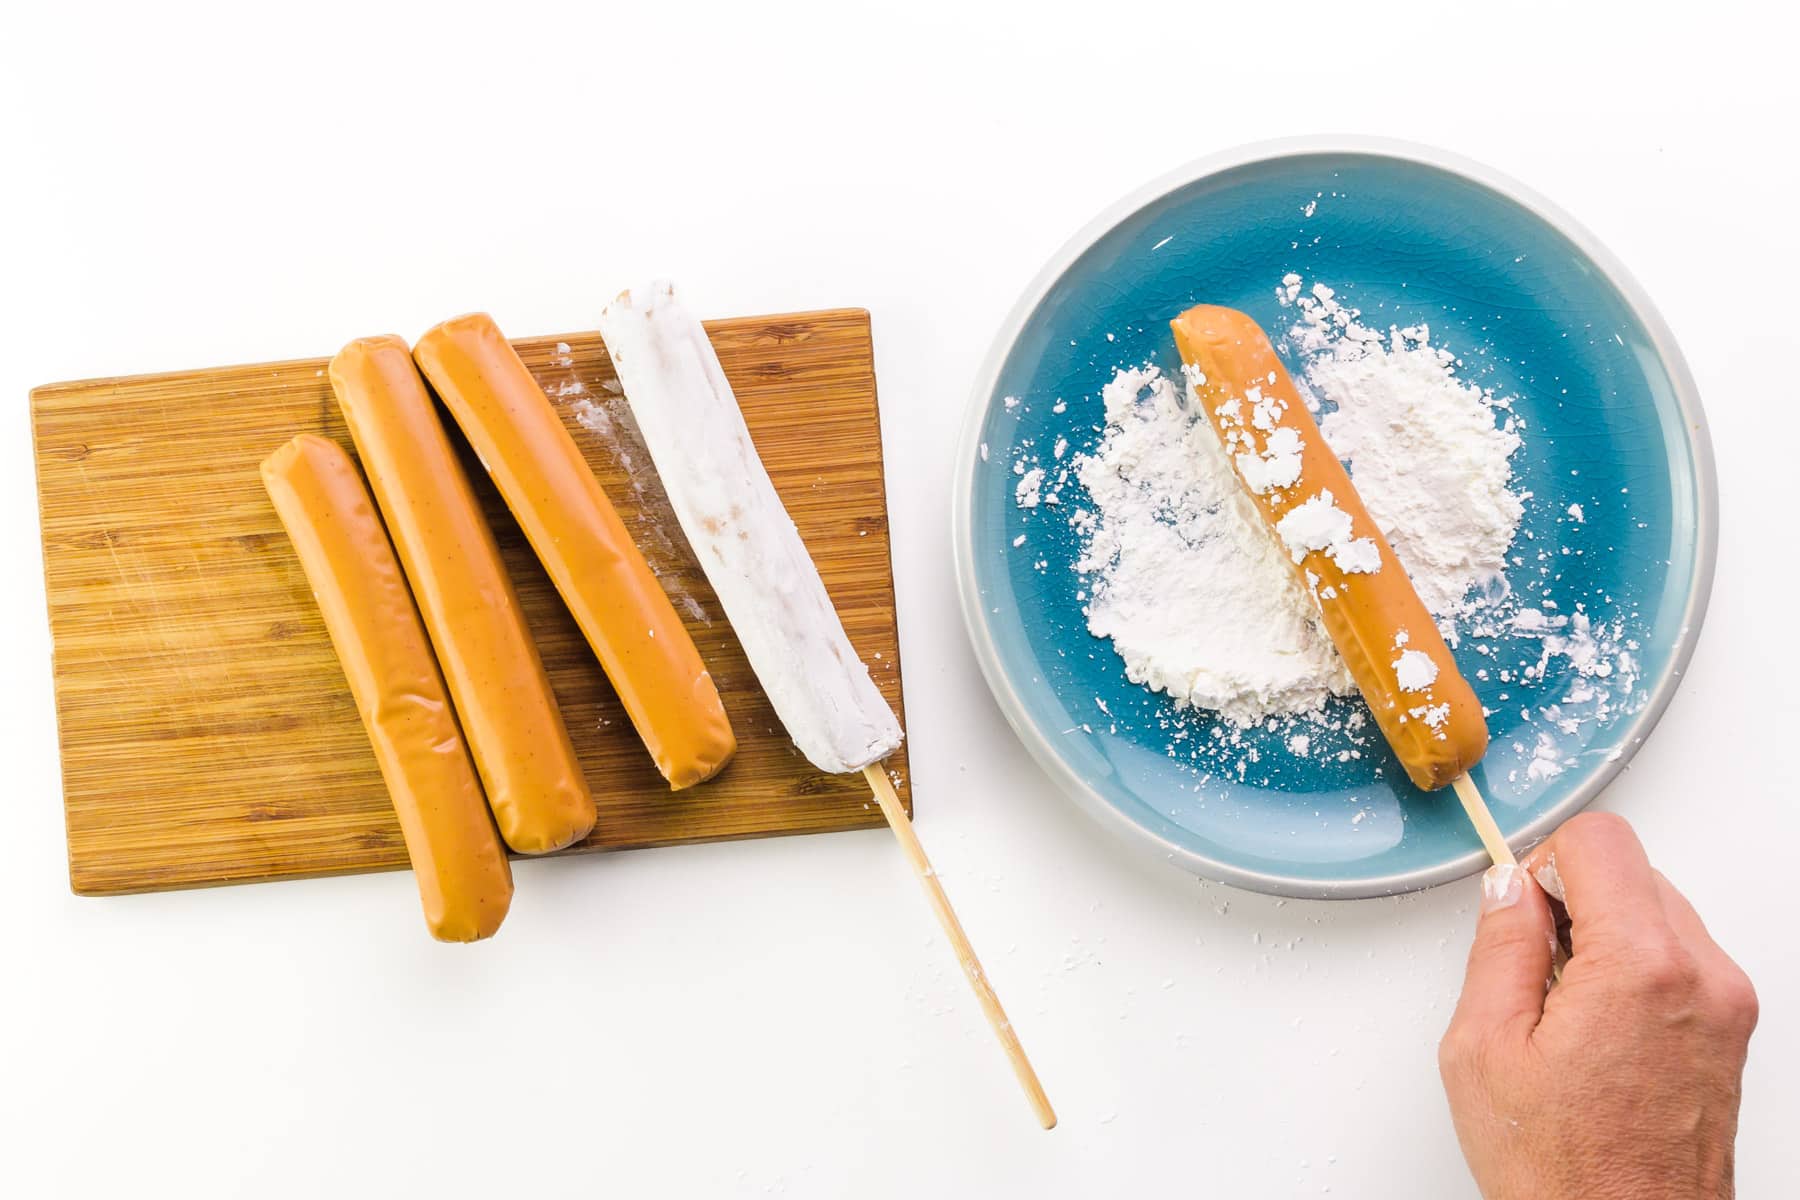 A hand holds a hot dog on a stick, rolling in on a plate with cornstarch. There are more hot dogs on a wooden cutting board by the plate.